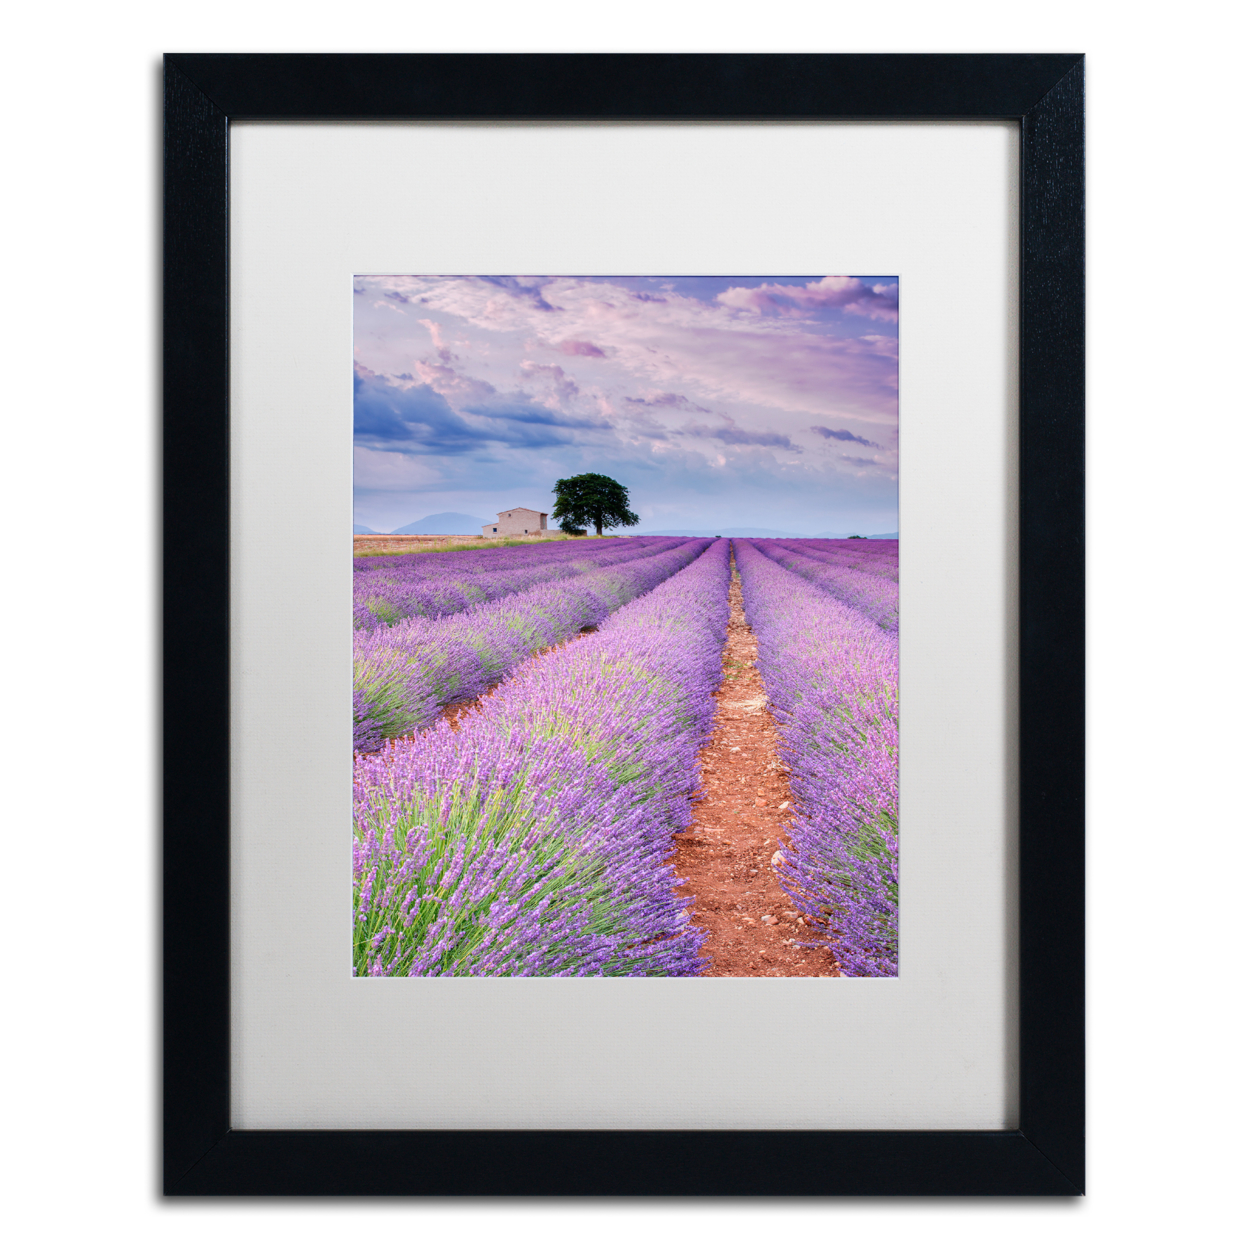 Michael Blanchette Photography 'Rows Of Lavender' Black Wooden Framed Art 18 X 22 Inches